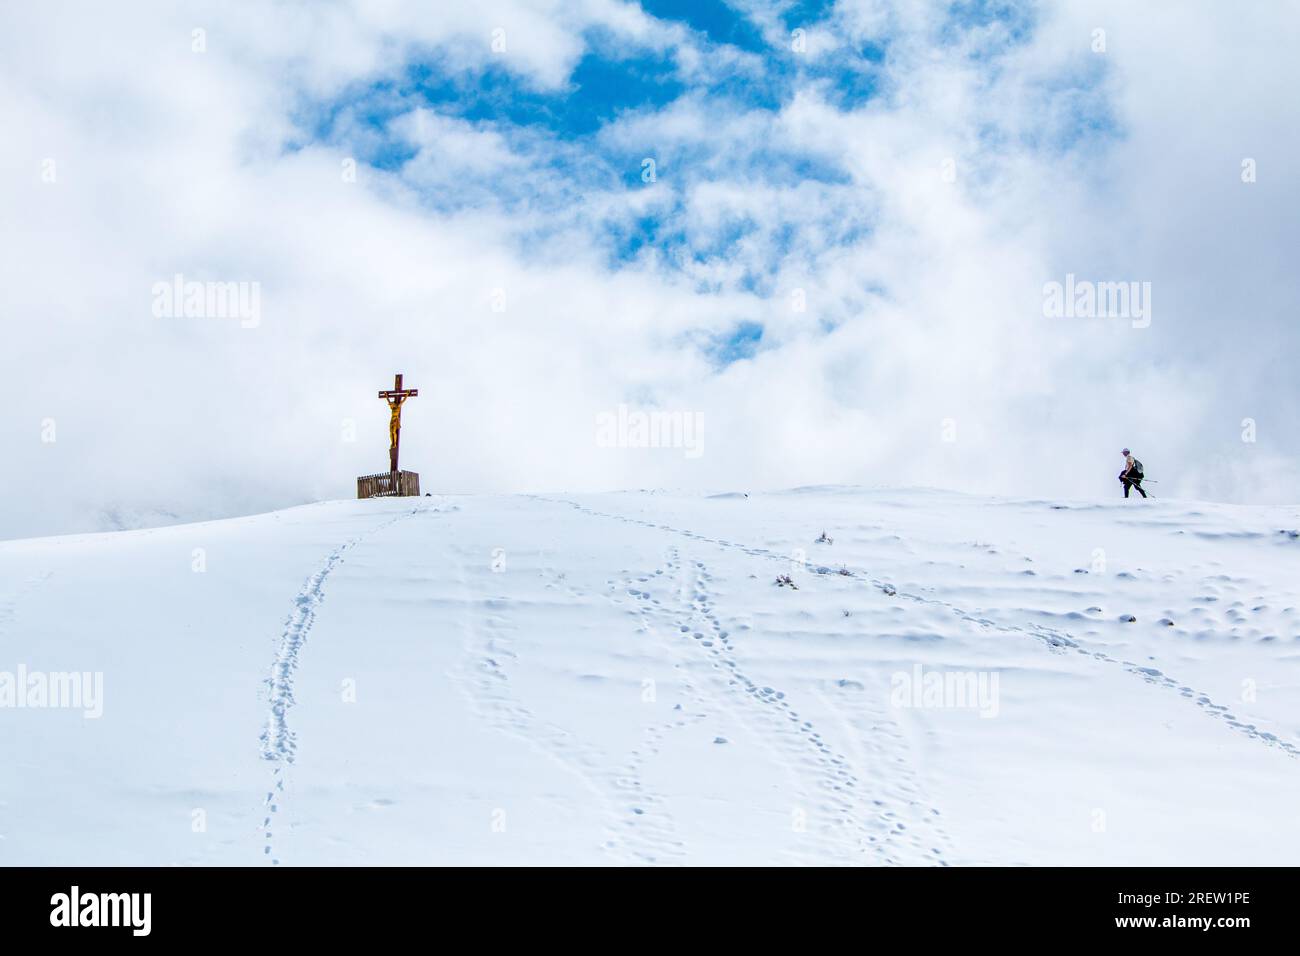 Lonely hiker approaching a statue of Jesus on the cross on top of a snowy mountain with blue sky surrounded by clouds Stock Photo